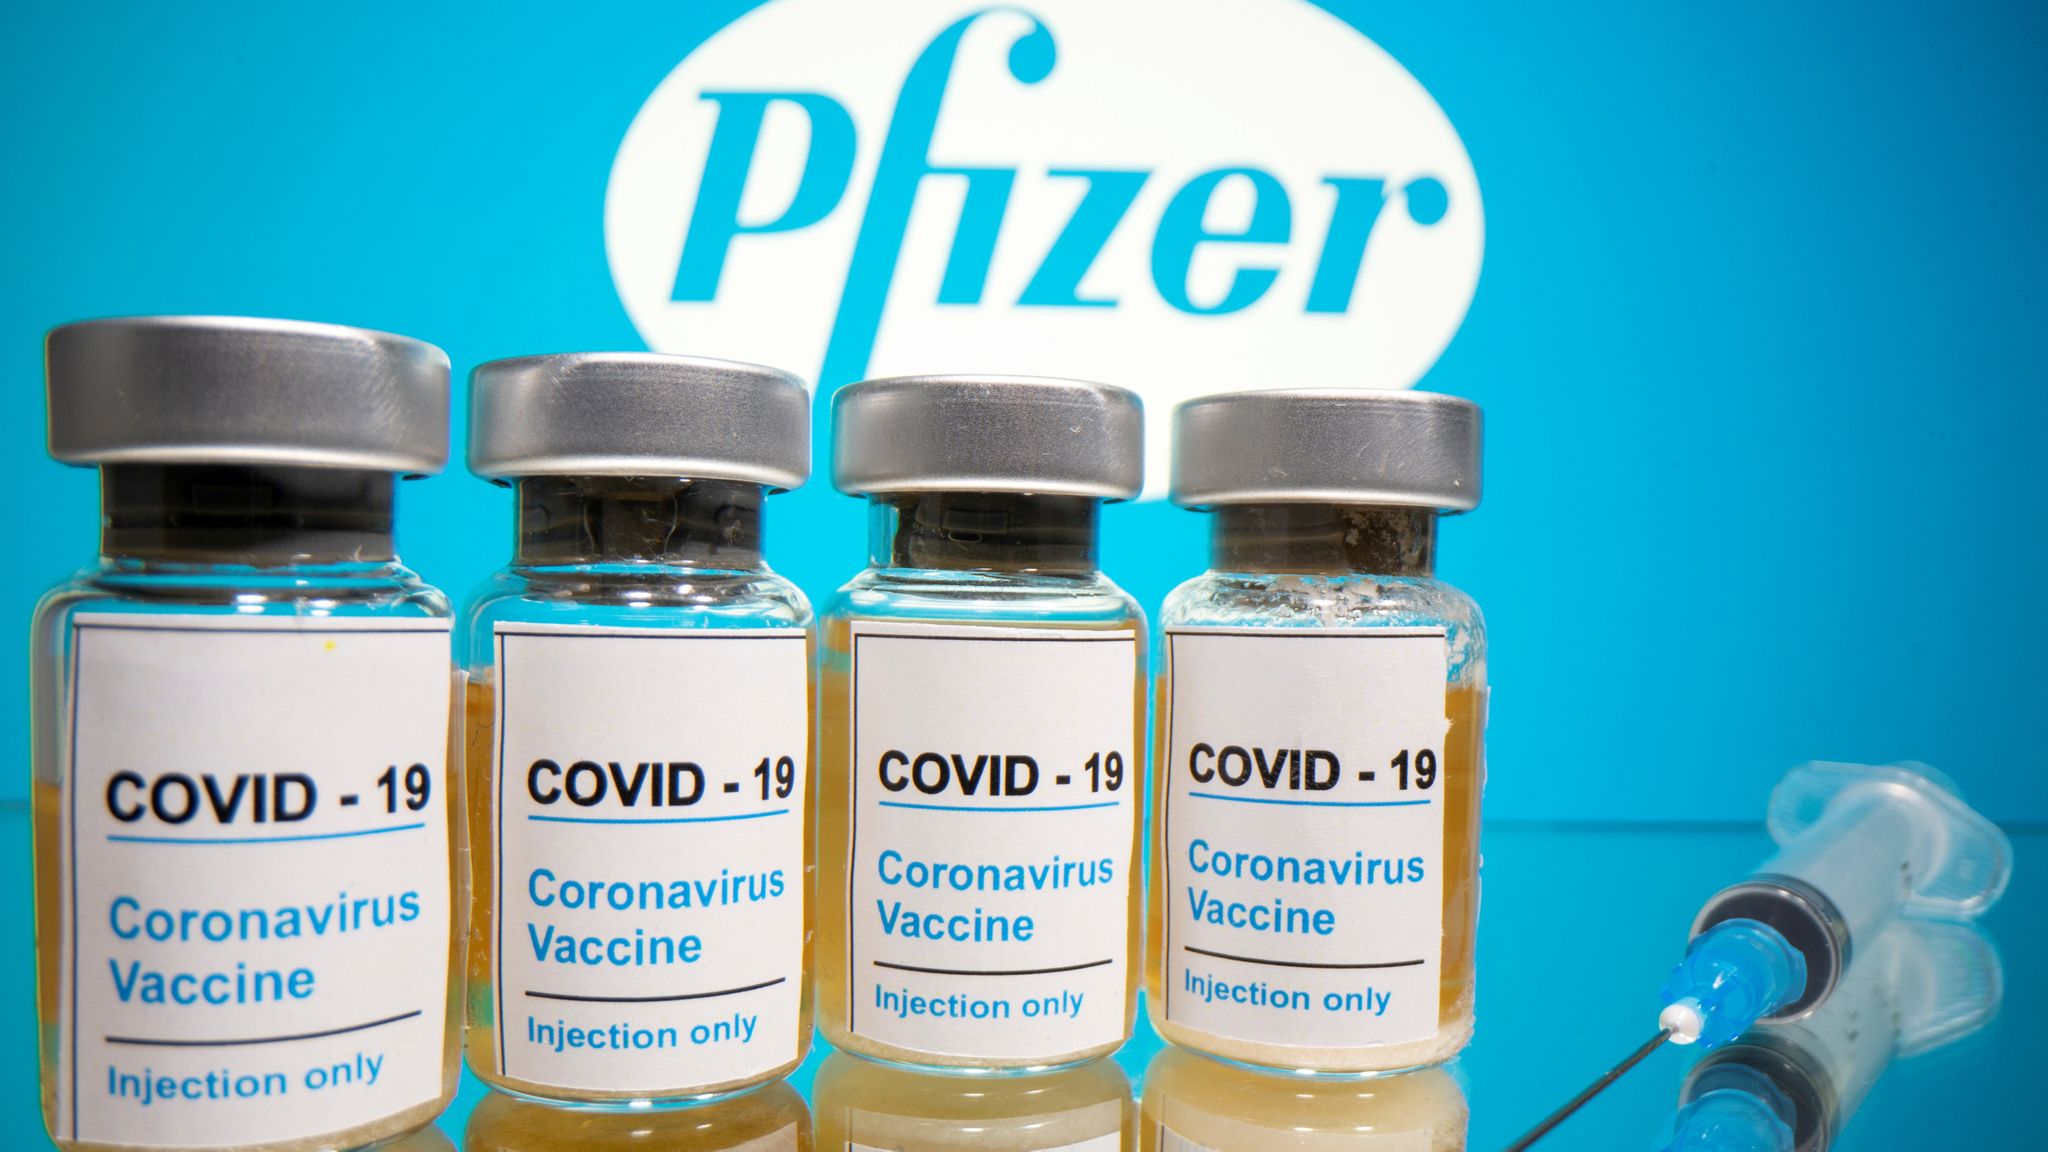 COVID 19: Pfizer BioNTech Vaccine Now 95% Effective And Will Be Submitted For Authorisation 'within Days'. Science & Tech News